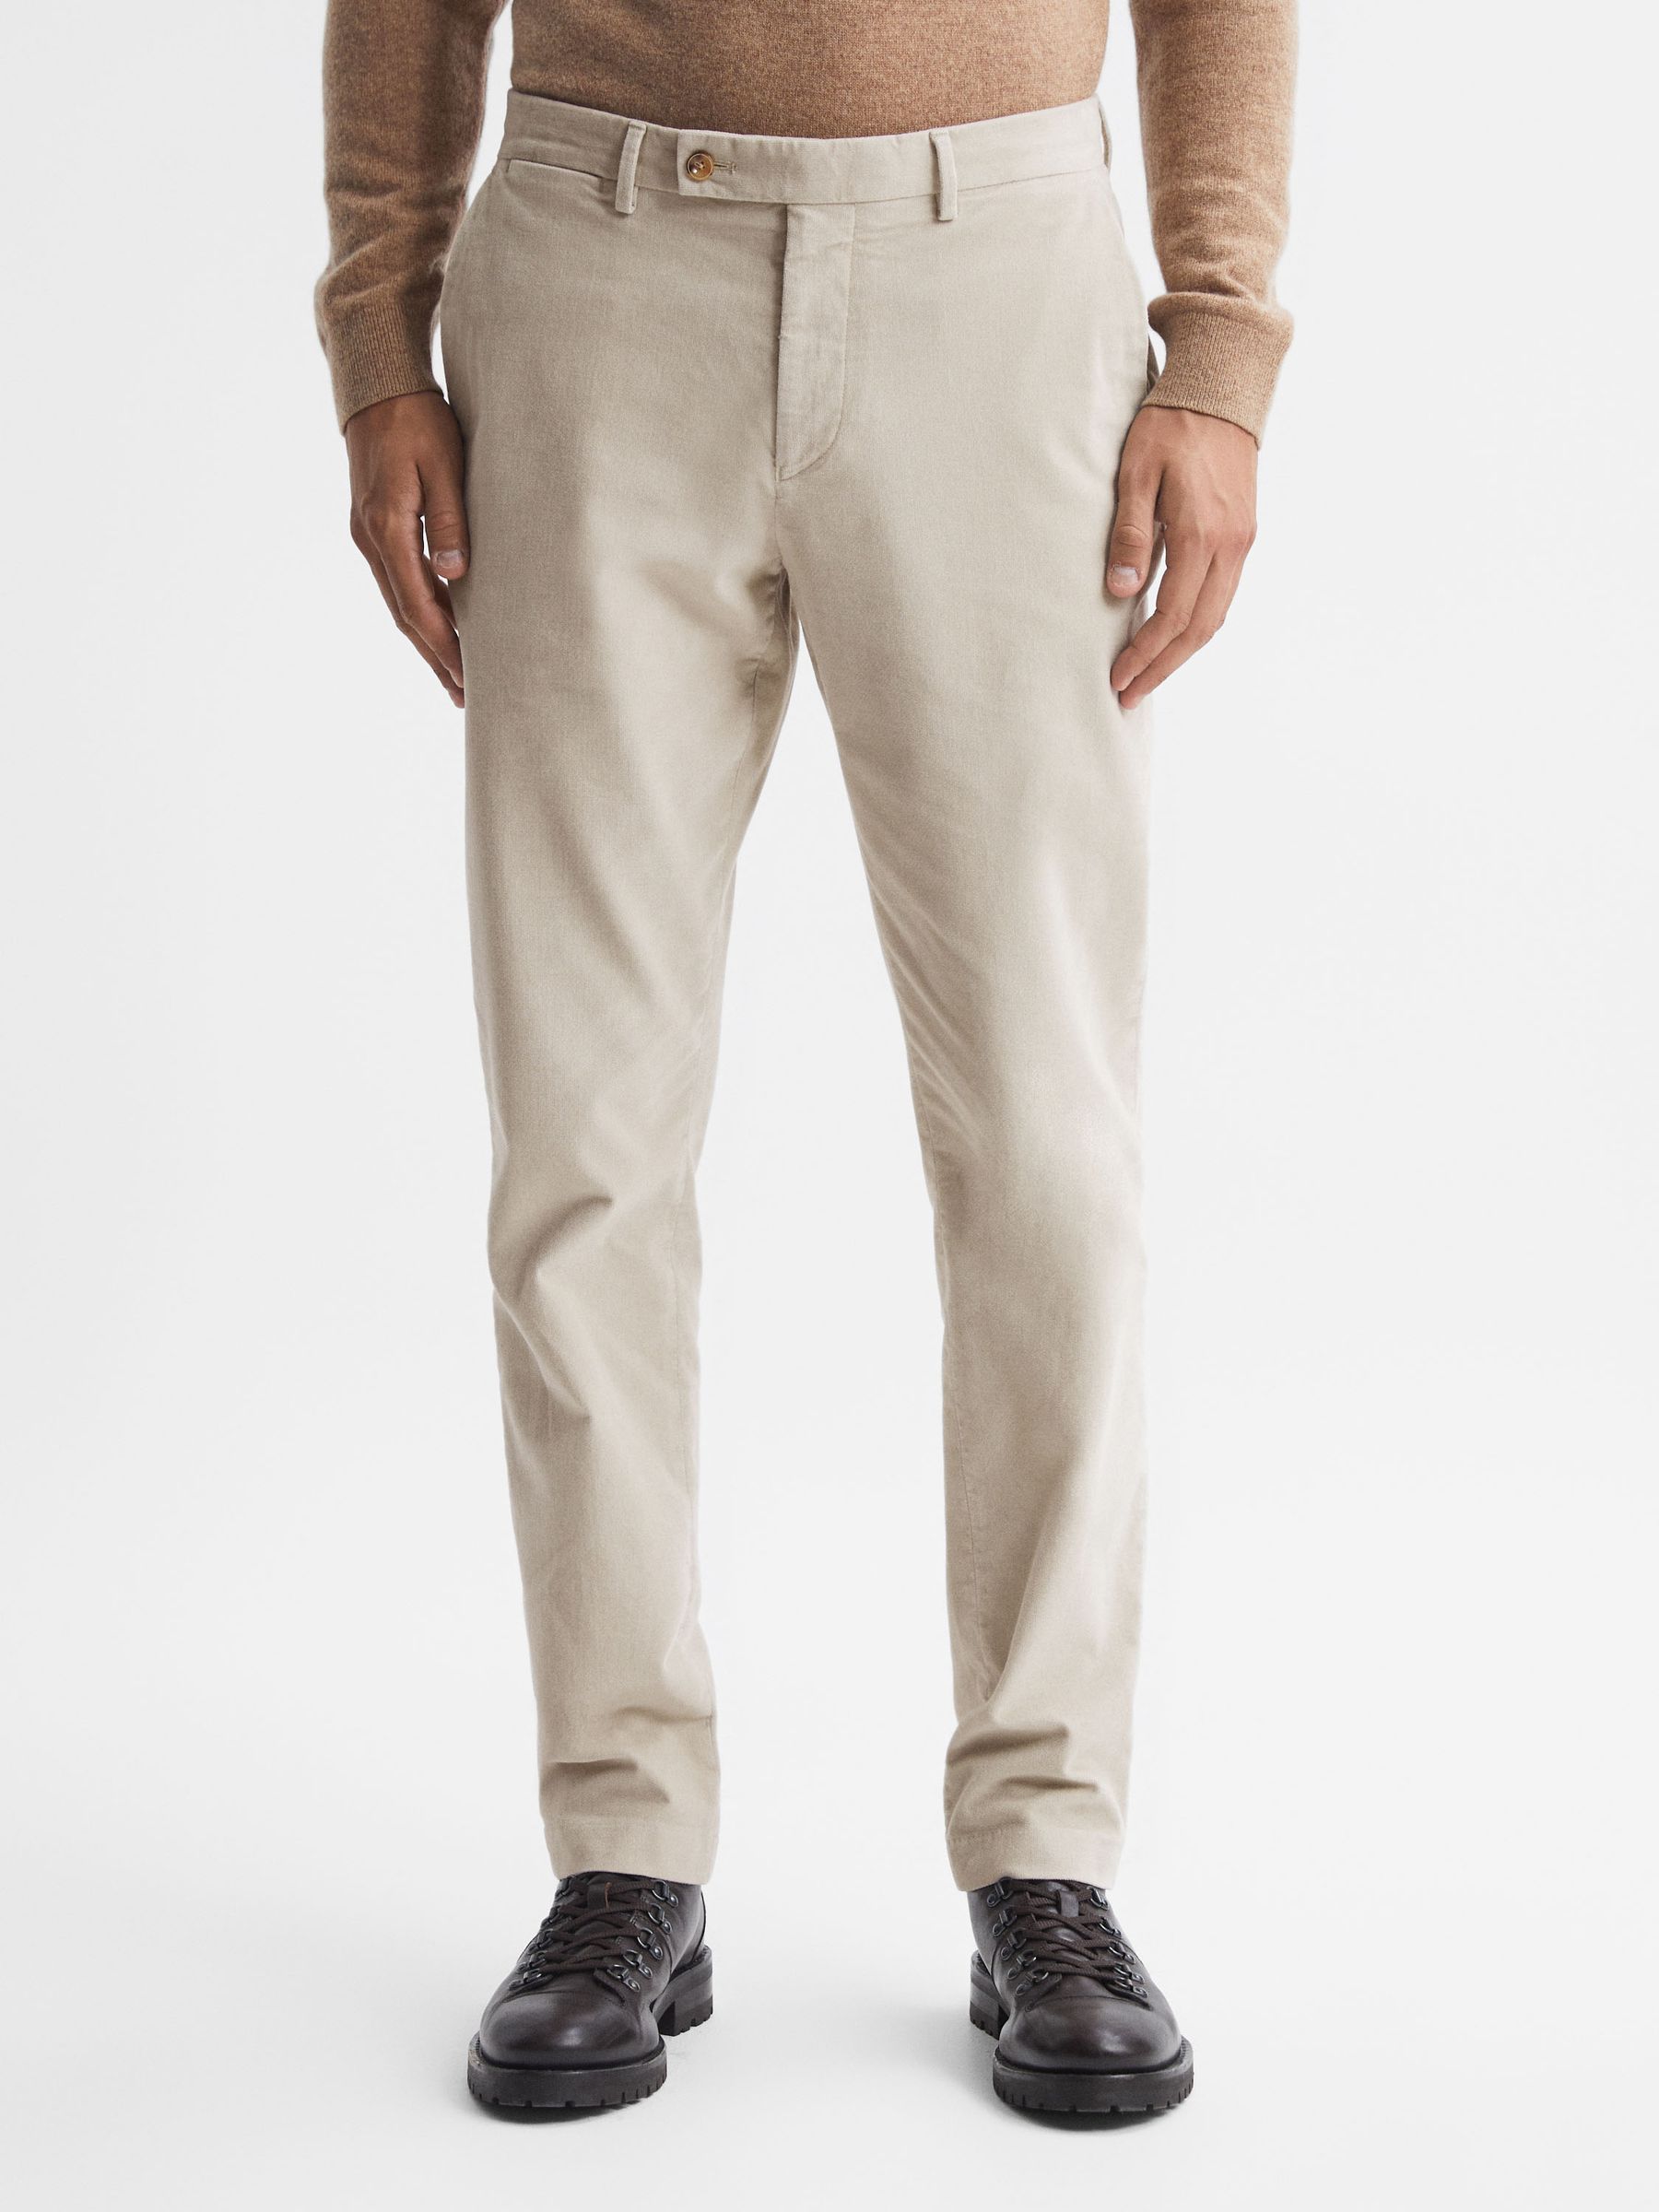 Reiss Strike Slim Fit Brushed Cotton Trousers - REISS